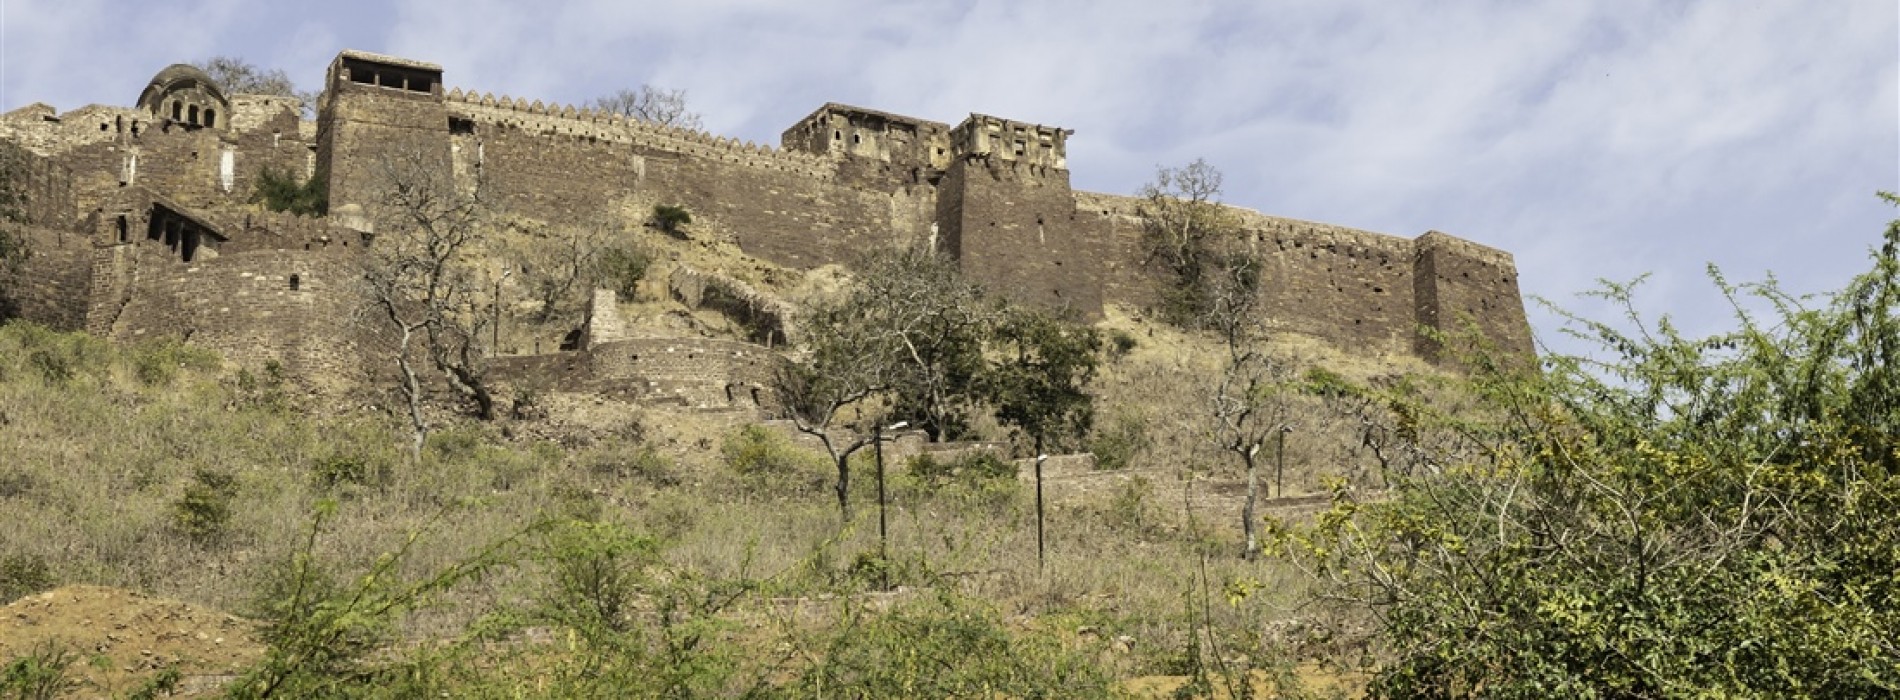 Narwar Fort reminds the story of Nal and Damyanti